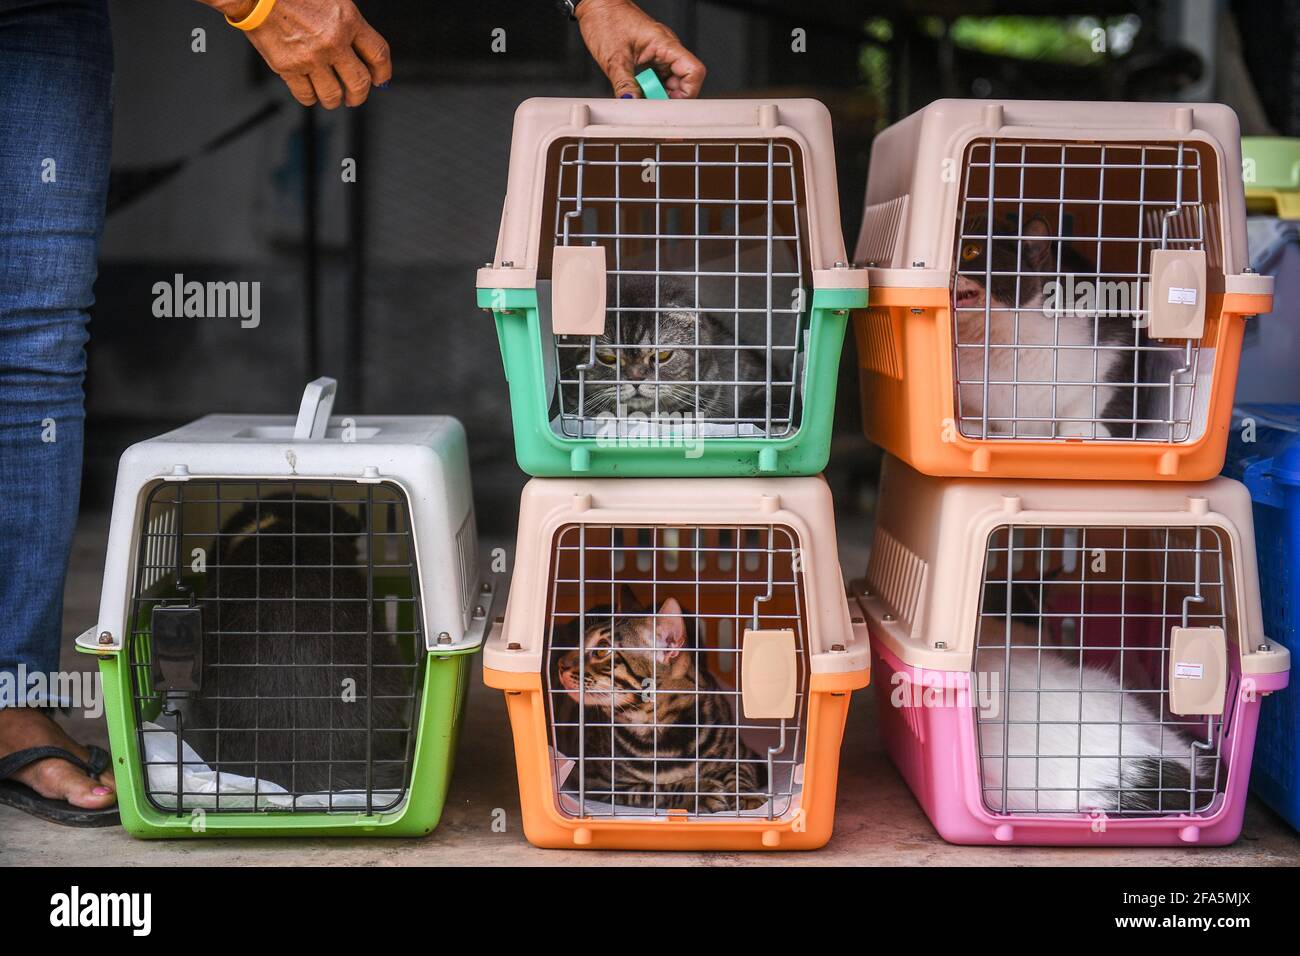 Pedigree cats which were confiscated as live assets in a drug bust case sit inside their cages before an auction at an animal shelter in Rayong province, Thailand, April 23, 2021. REUTERS/Chalinee Thirasupa Stock Photo